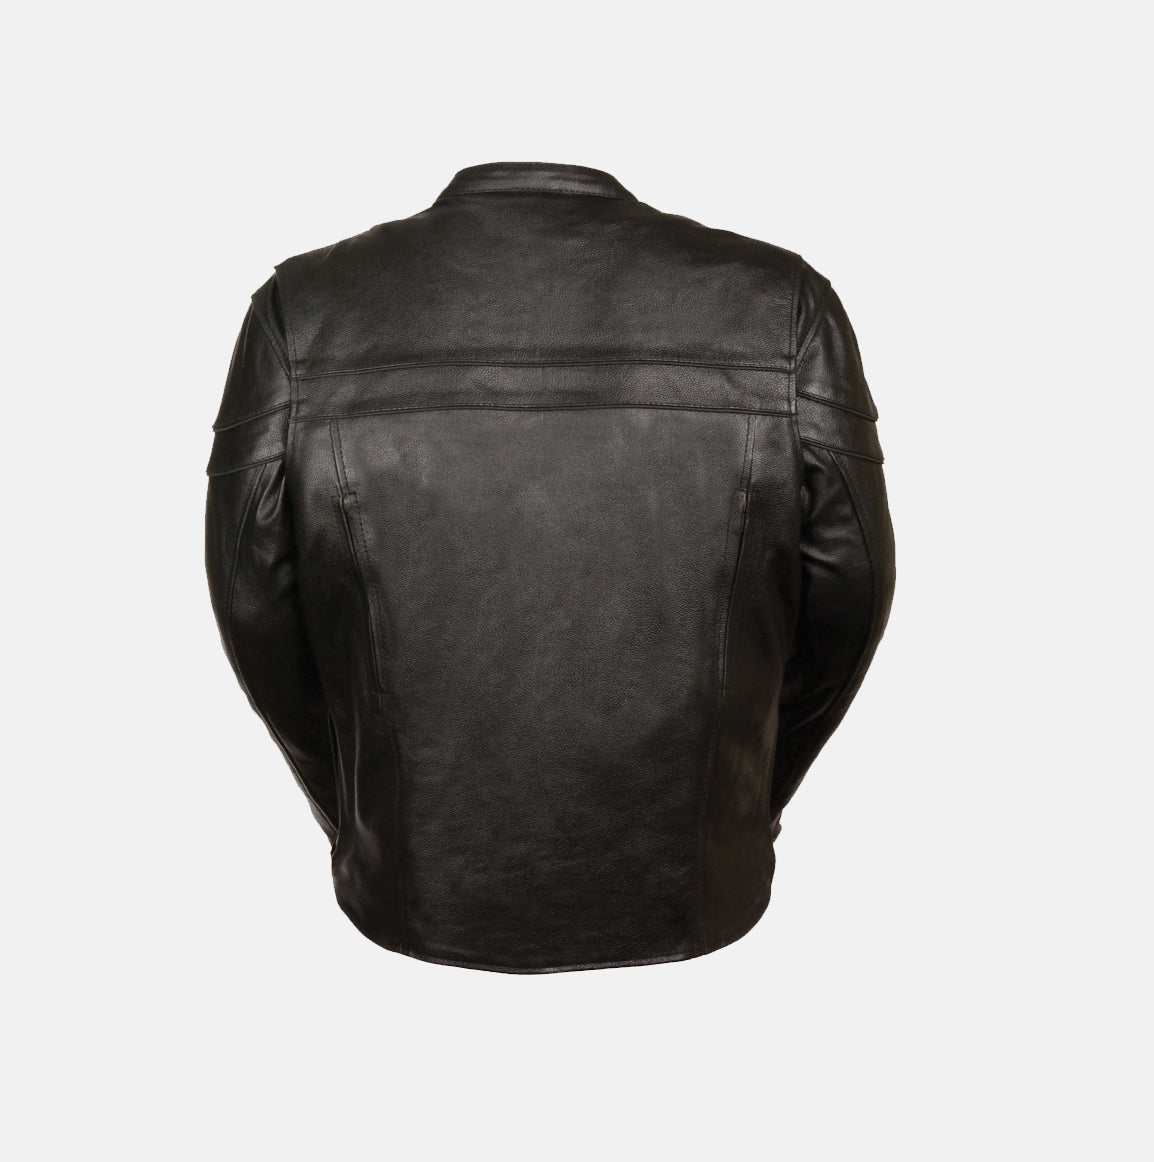 Cheap Leather Jackets for Men Sale 2016-17